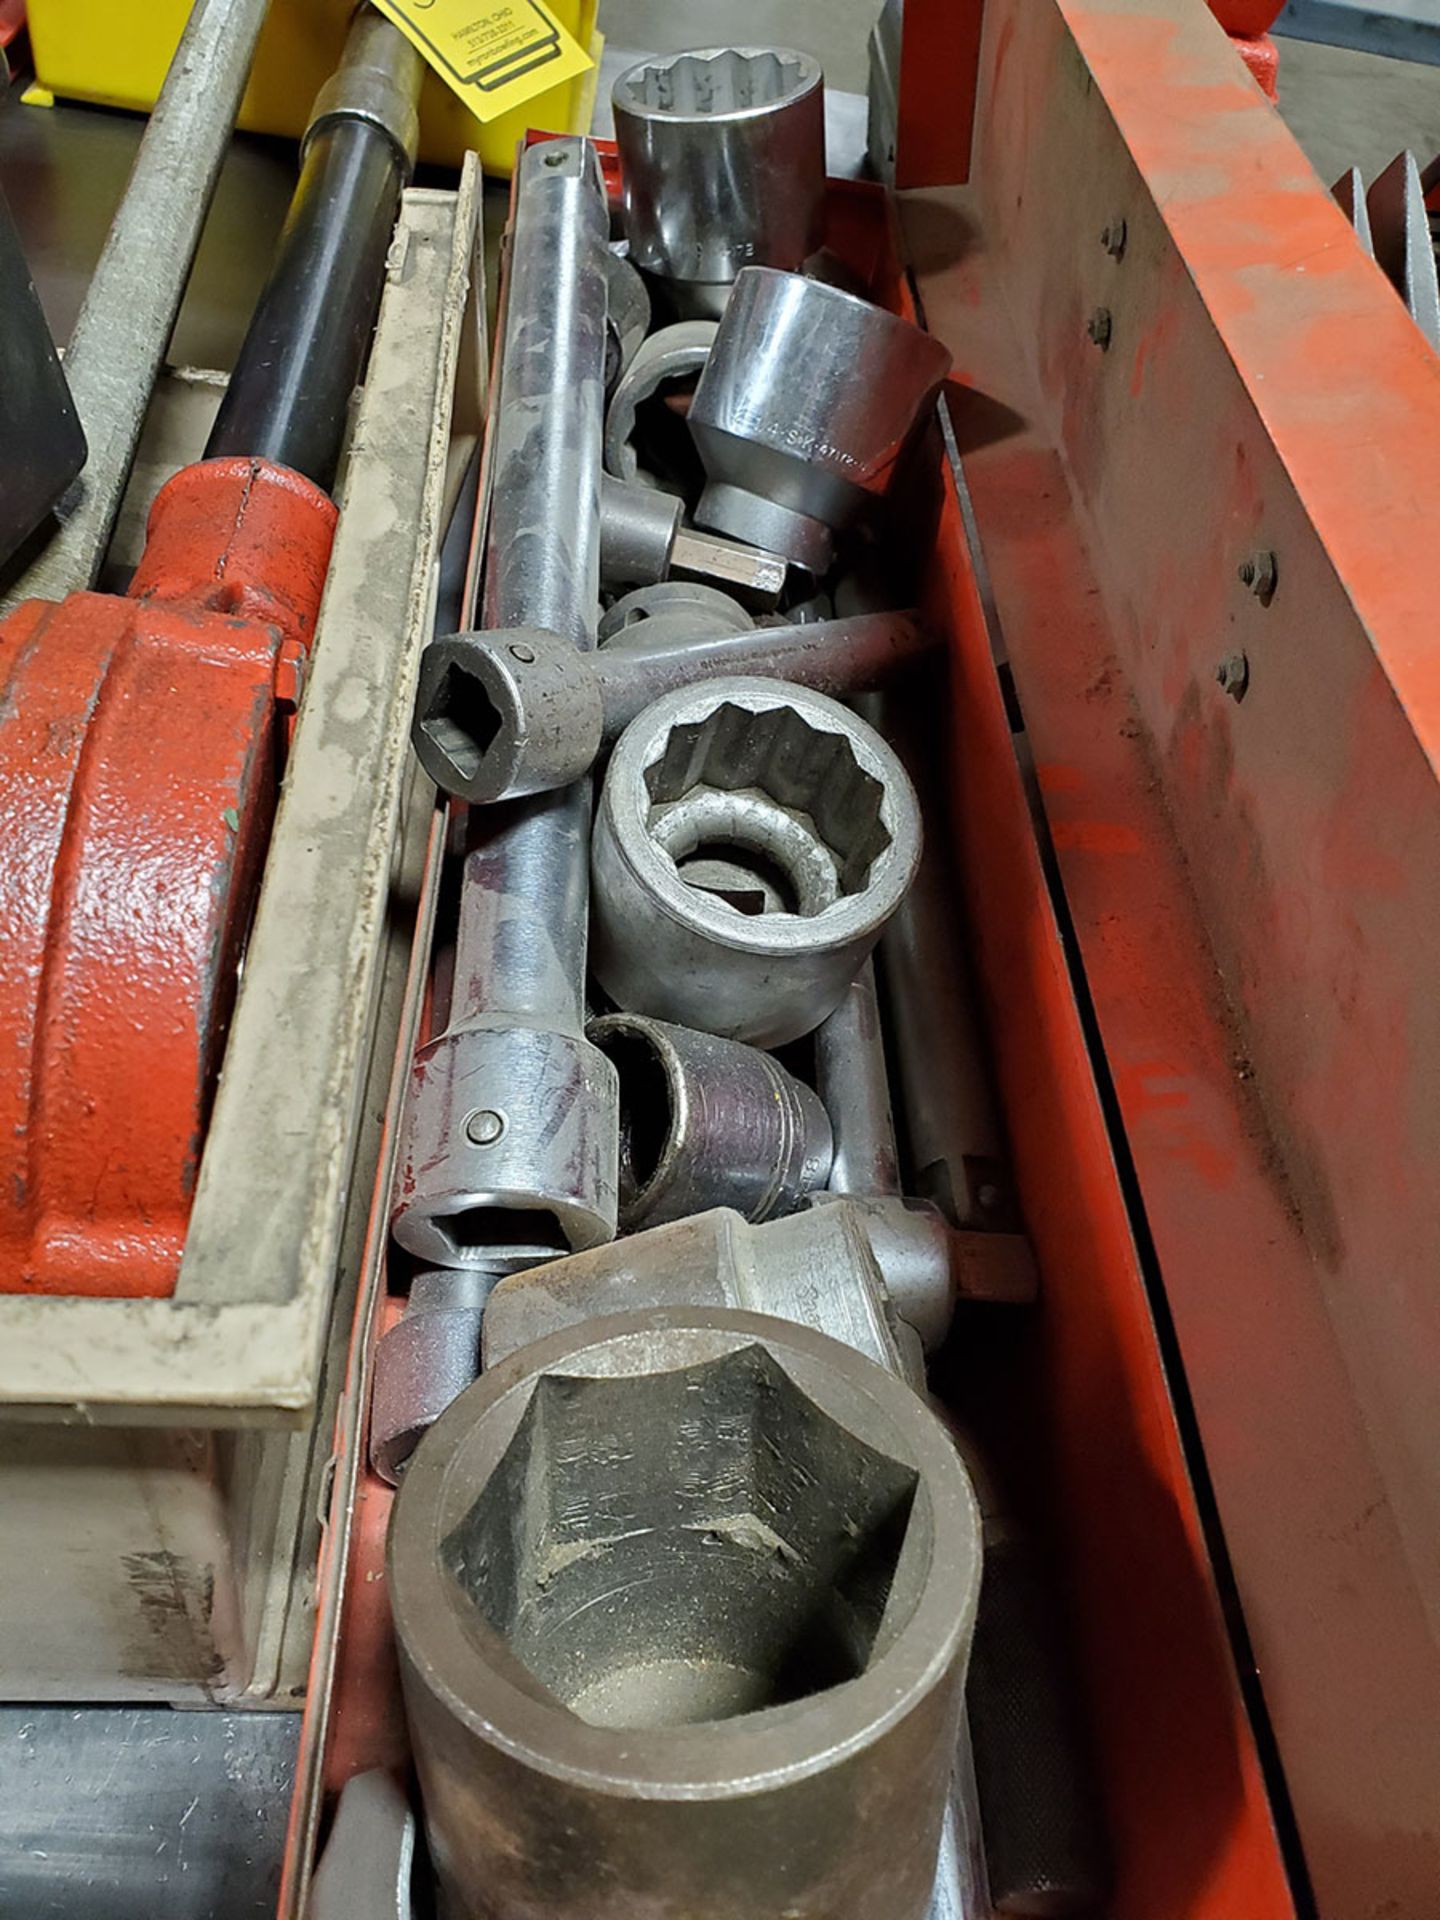 LOT OF SOCKETS, DRIVES, OVERSIZE SOCKETS, AND LOWELL WRENCH - Image 5 of 7